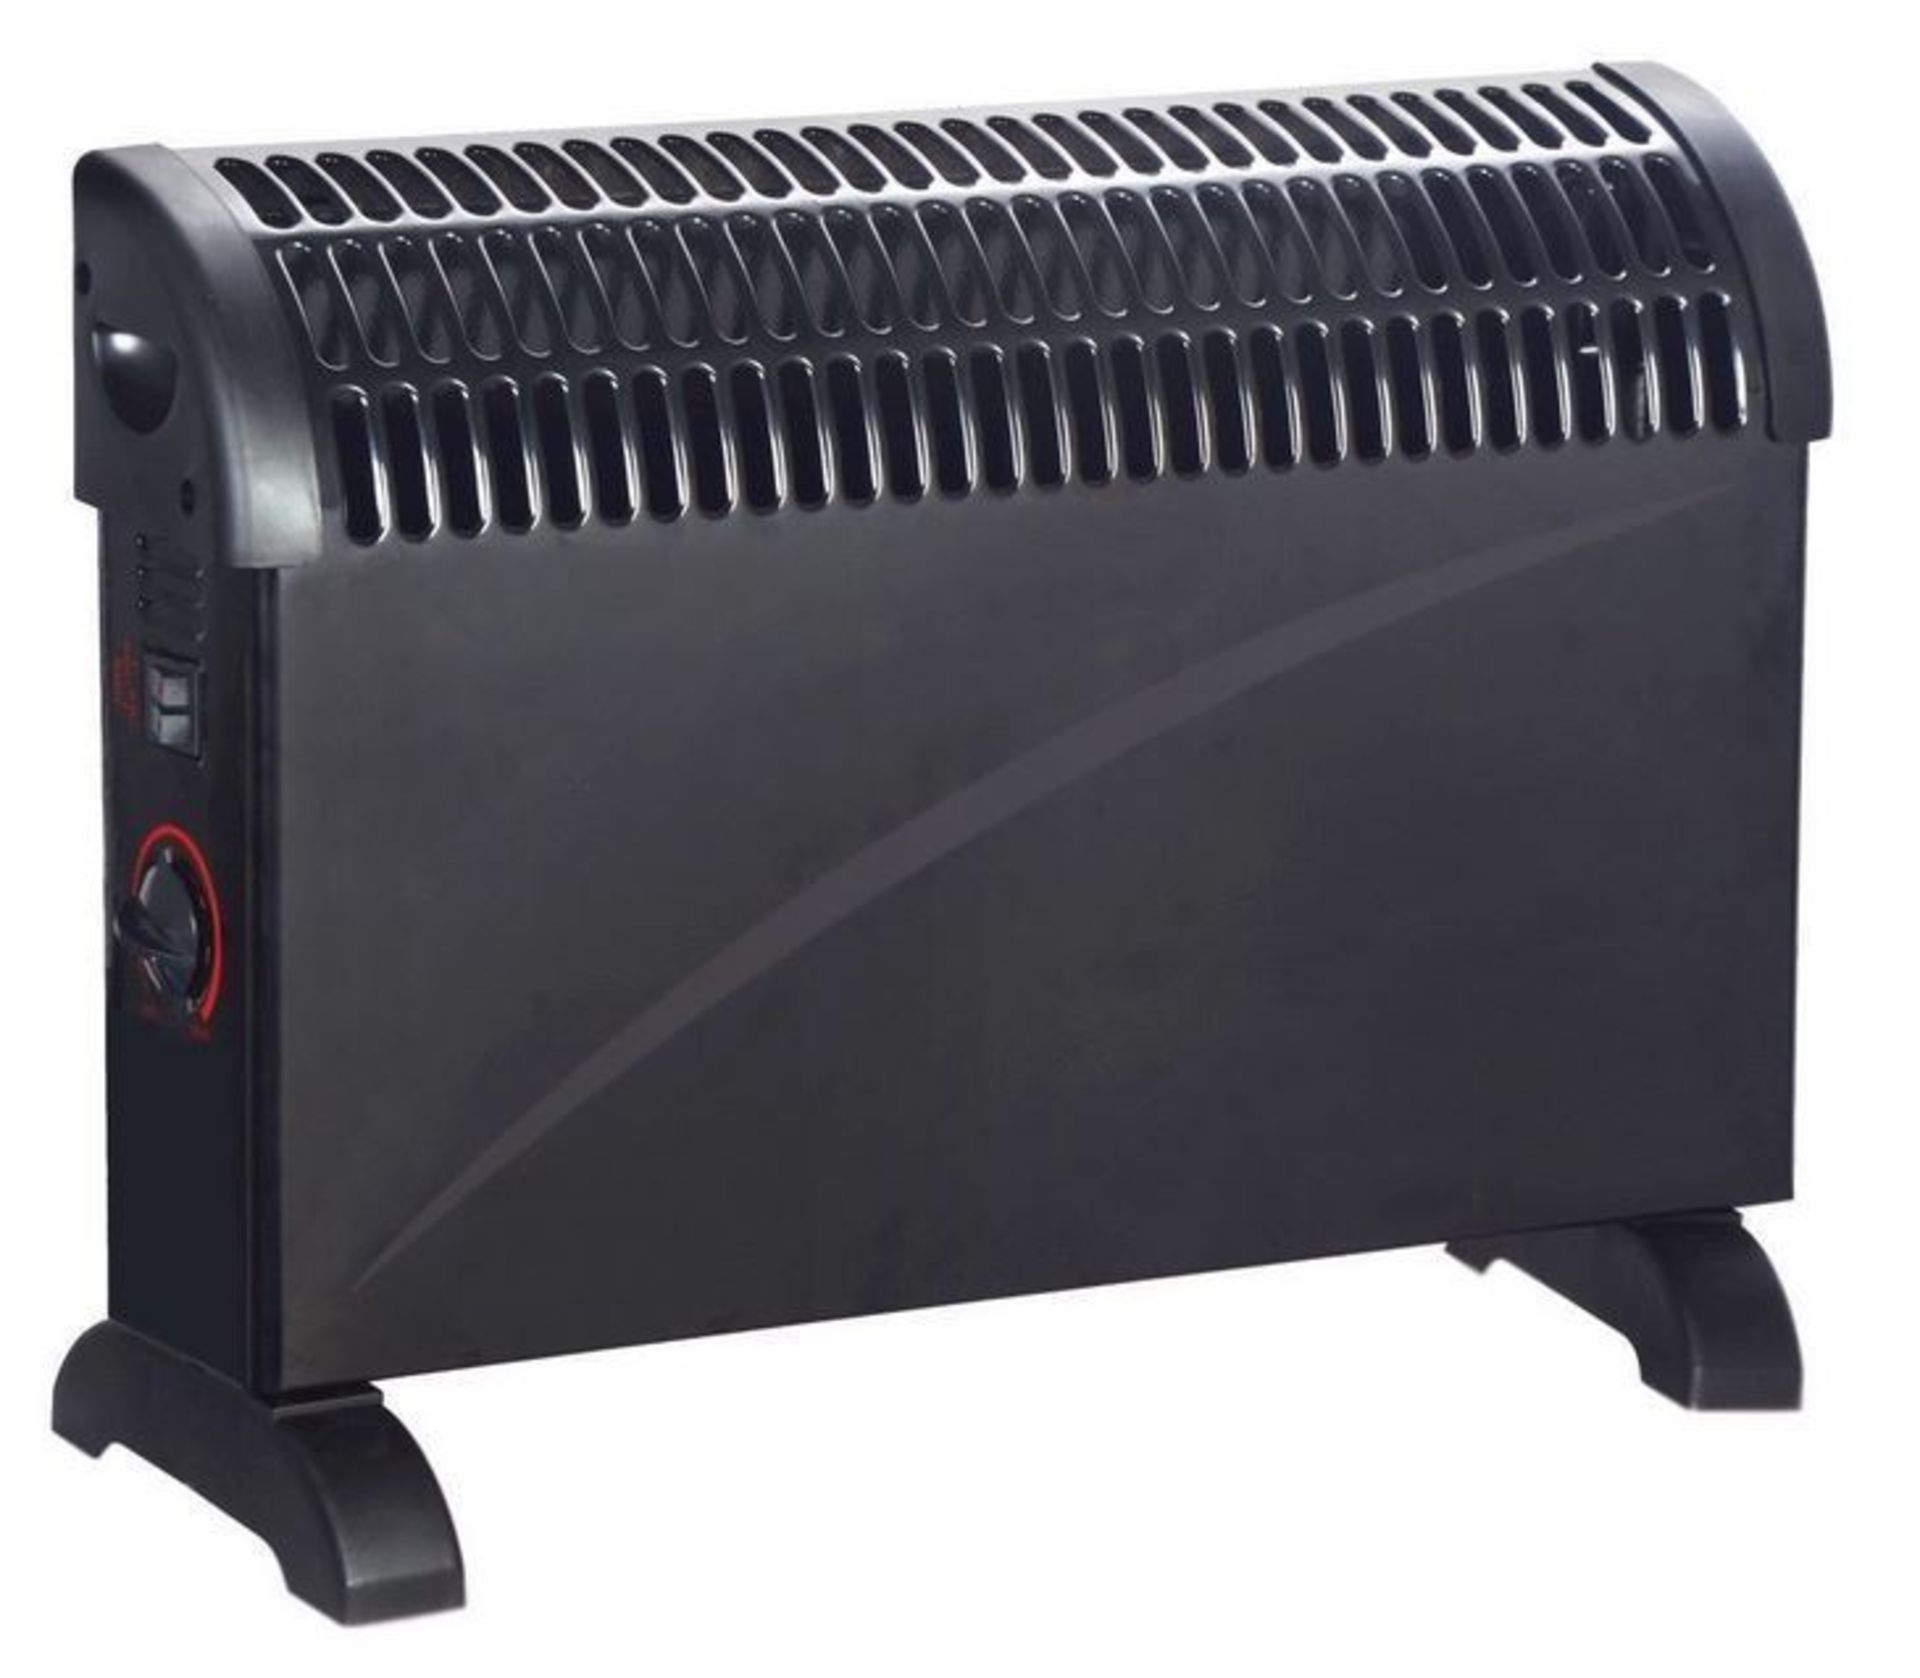 V Brand New Powatron 750/1250/2000w Convector Heater-3 Heat Settings-Adjustable Thermostat-